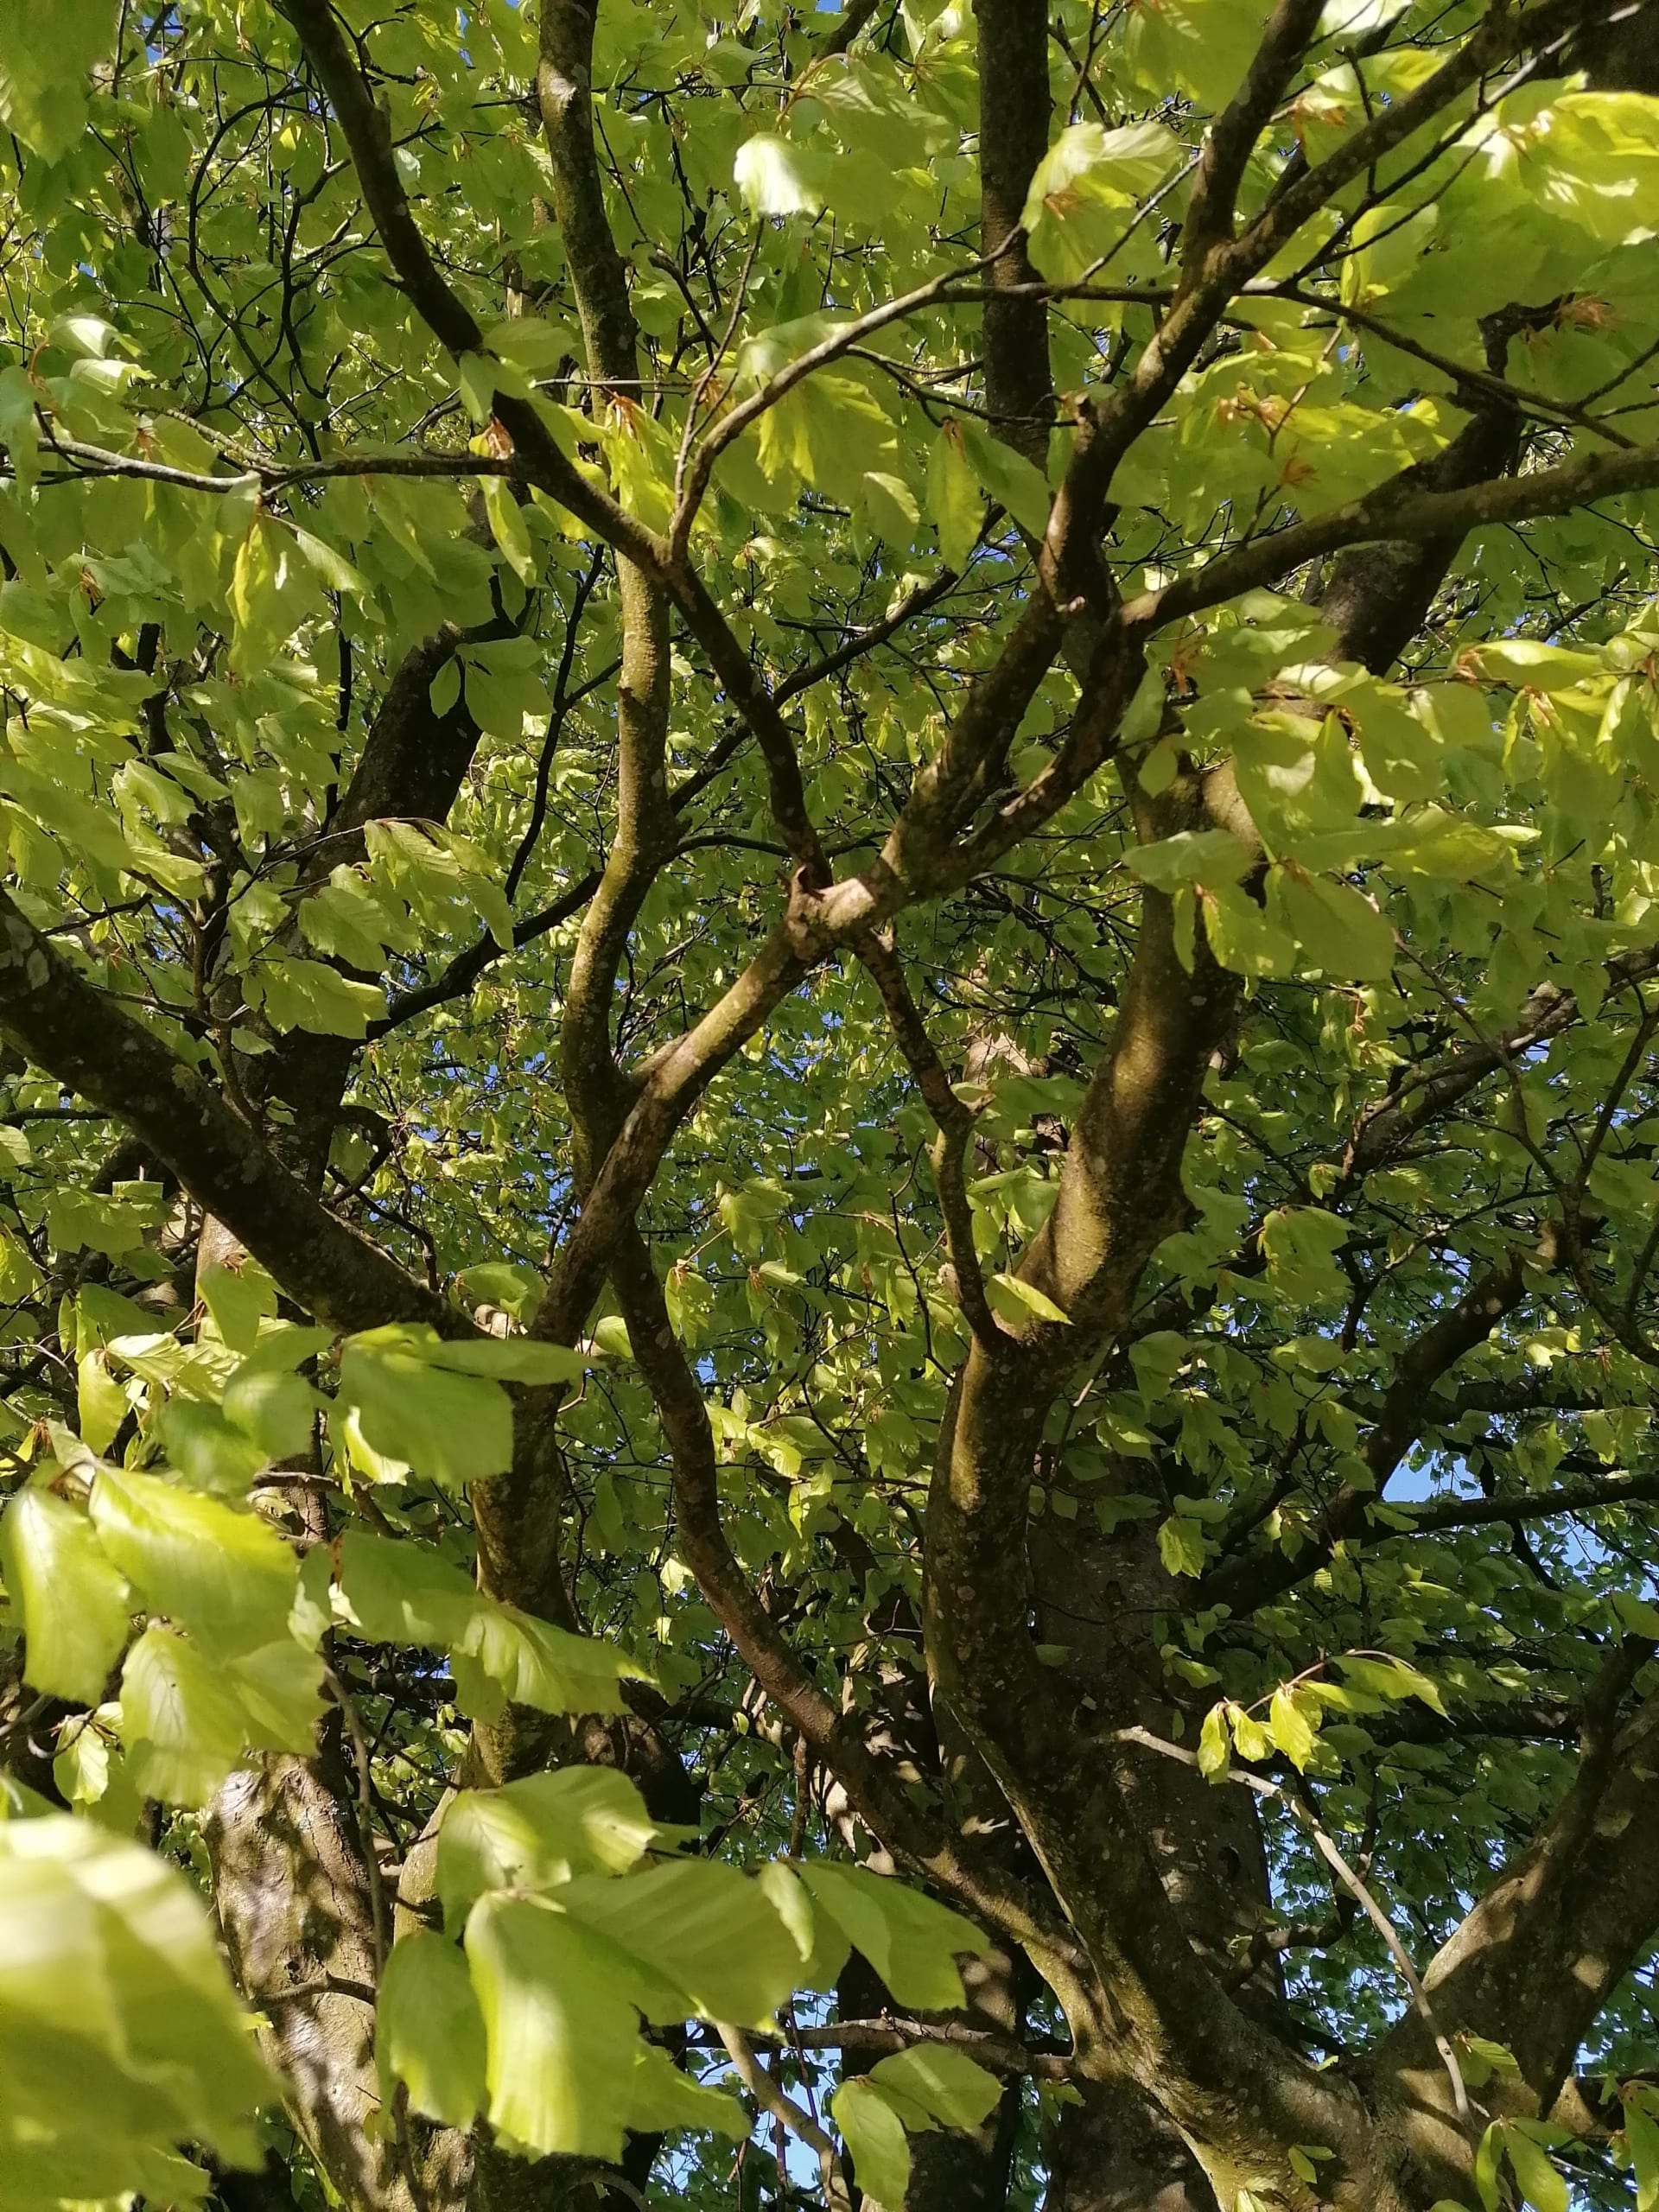 An image of fresh green beech leaves looking up through the branches of the tree